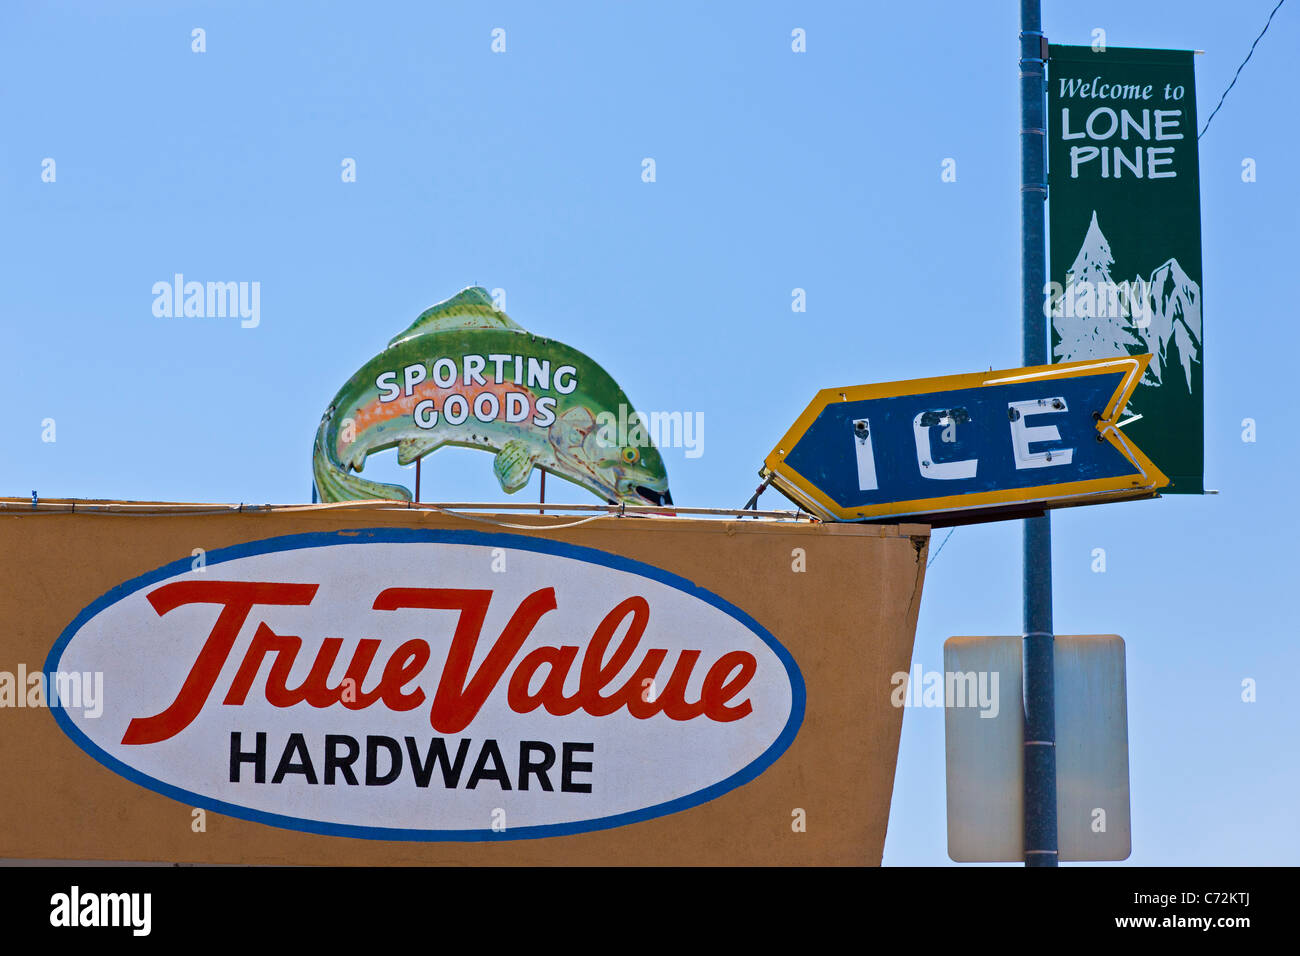 True Value Hardware store on Main Street, Lone Pine in the Owens Valley, east of the Sierra Nevada, California USA. JMH5317 Stock Photo